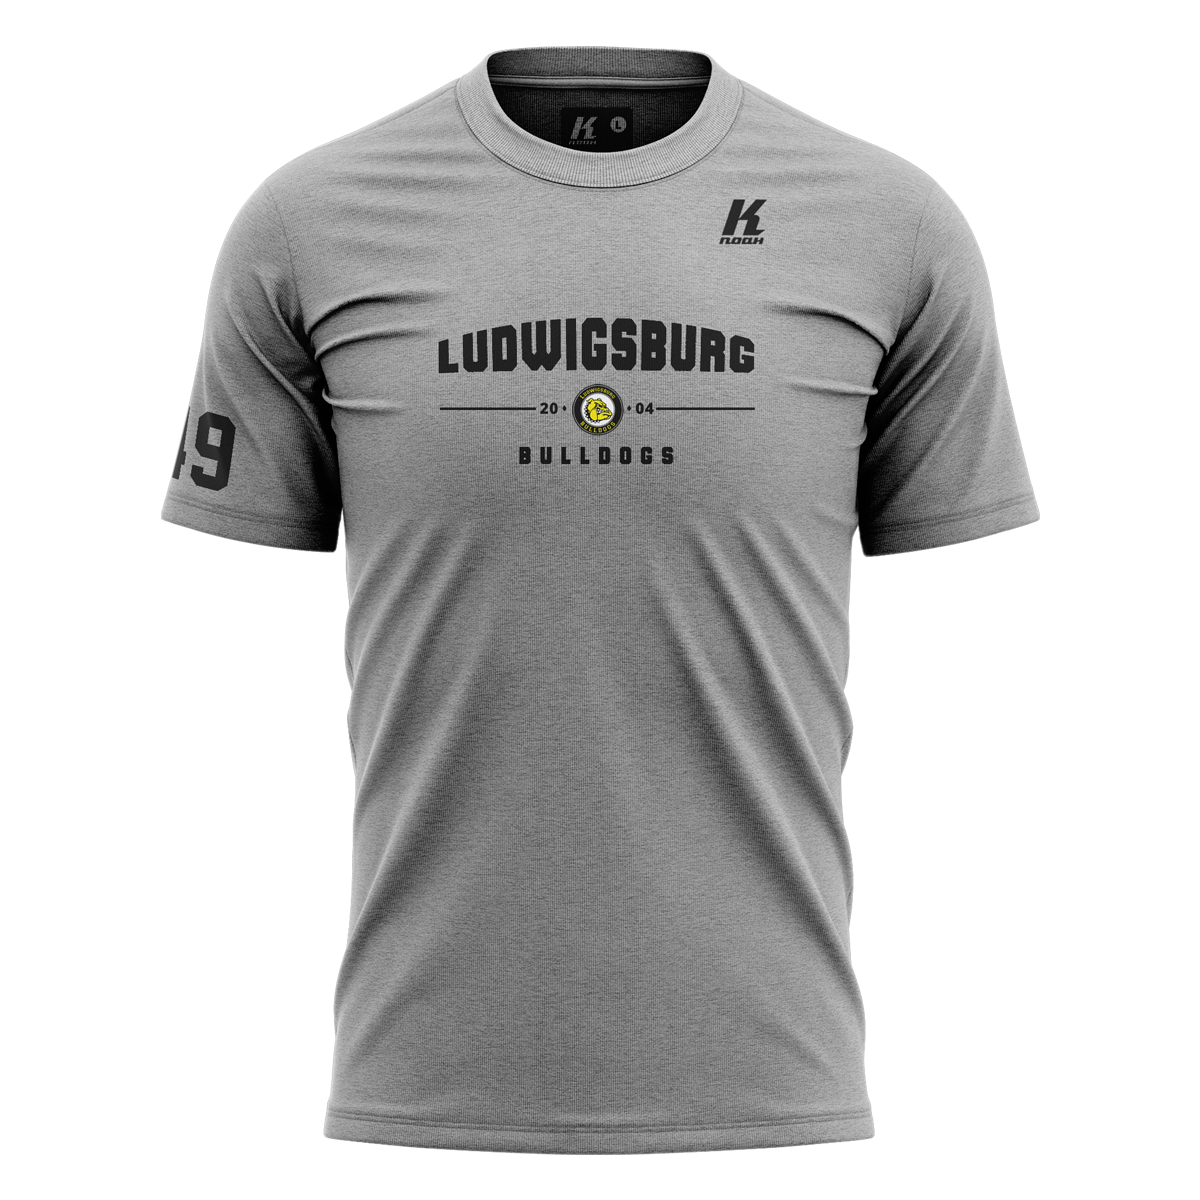 LB-Bulldogs Wordmark Tee grey 190g. with Playernumber/Initials